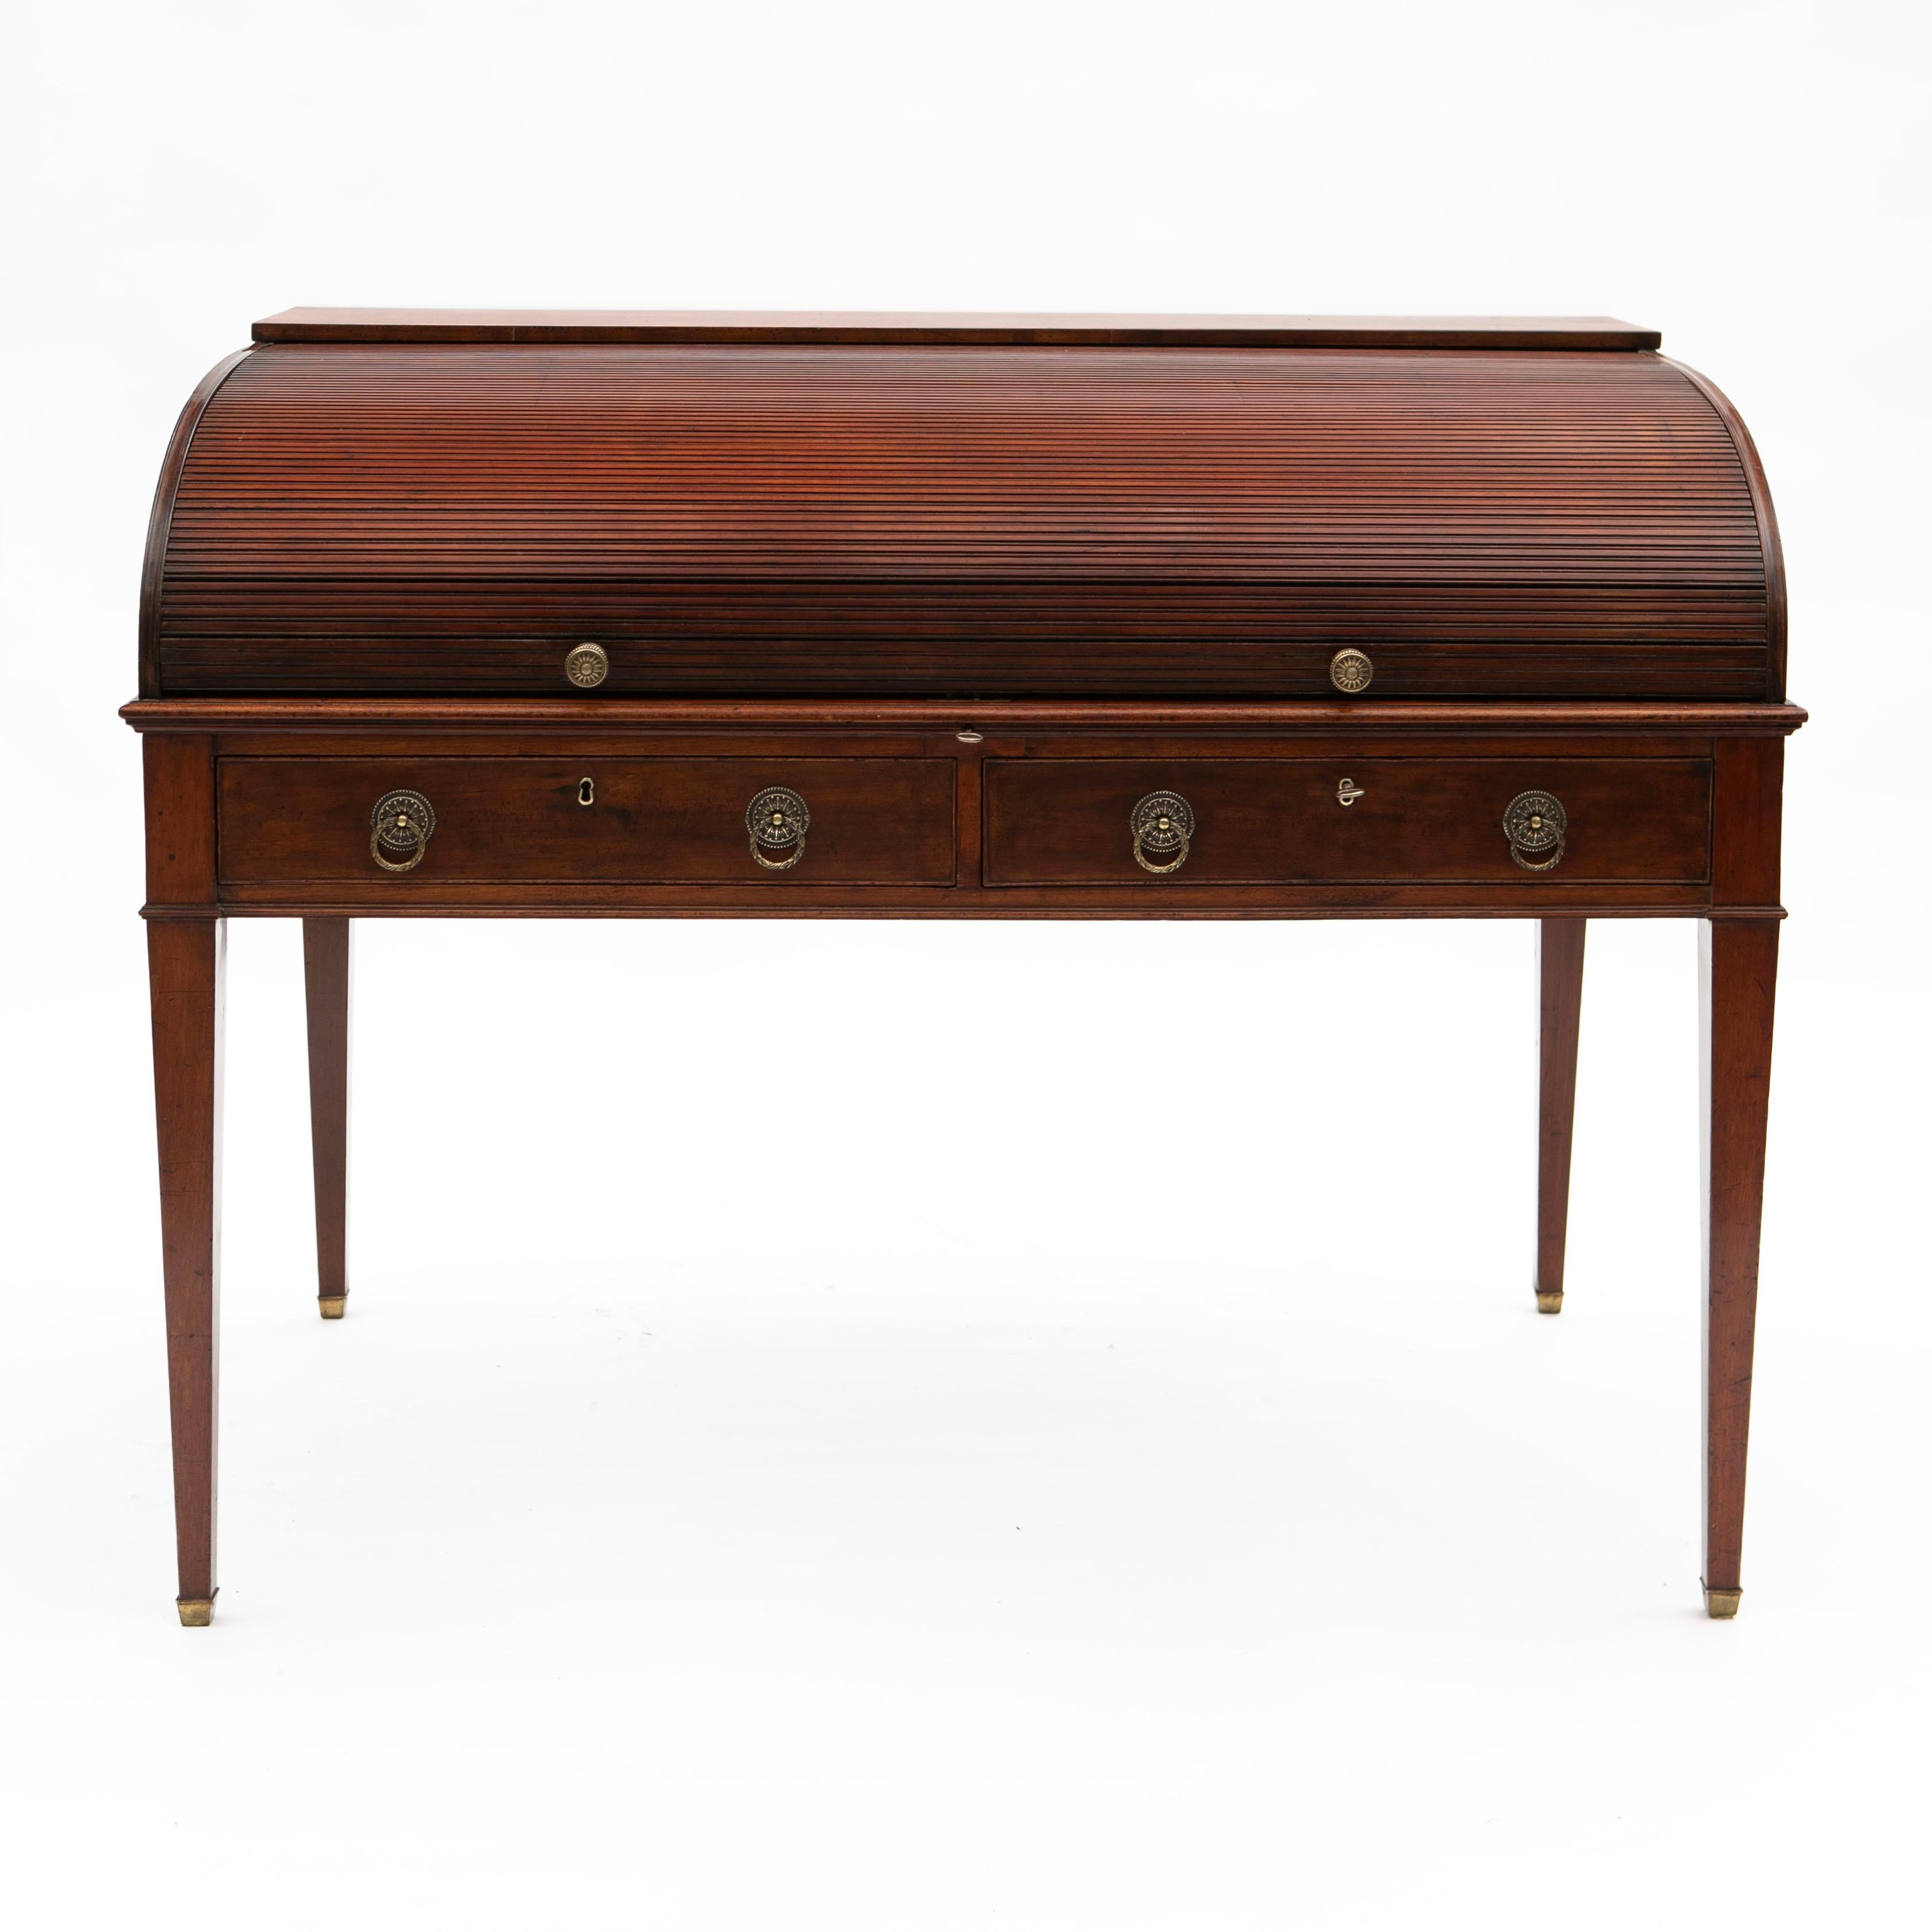 An elegant 19th century freestanding mahogany roll top writing desk.

Tambour top rolls back to reveal a fitted interior with drawers, pigeon holes and a slant lid leather writing surface. Apron with 2 larger drawers raised on elegant square tapered